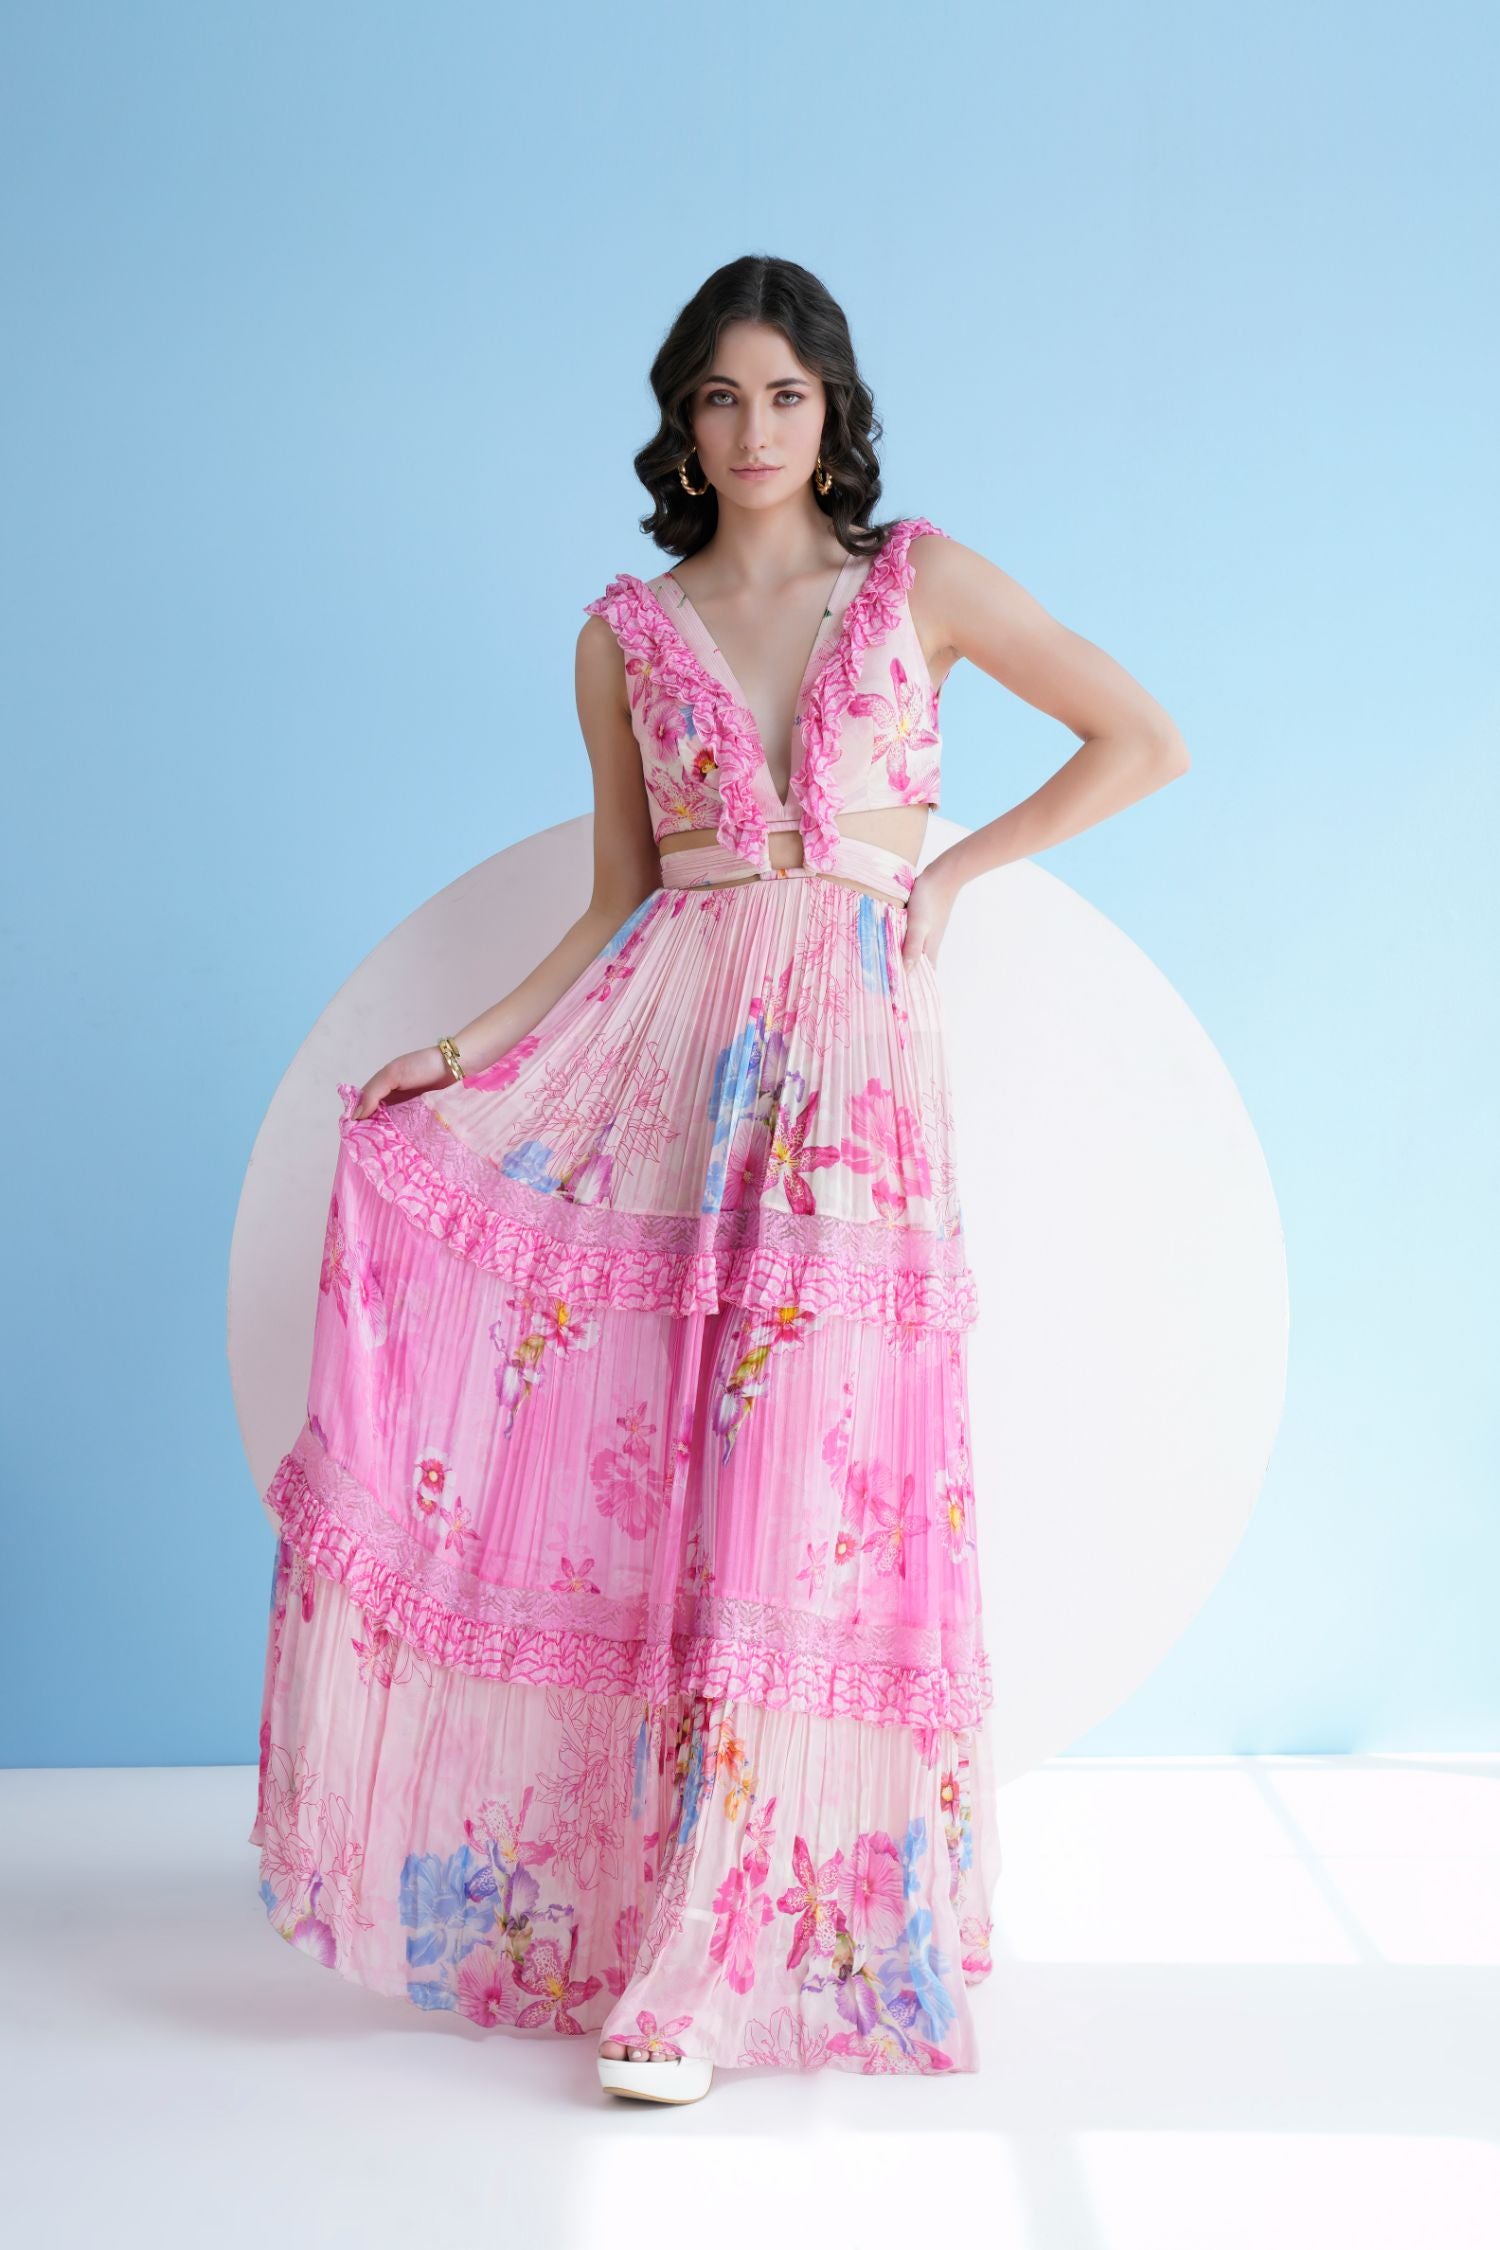 Pink Pastoral Printed Dress In Chiffon With Frilled Plunging Neckline, Waist Cutout